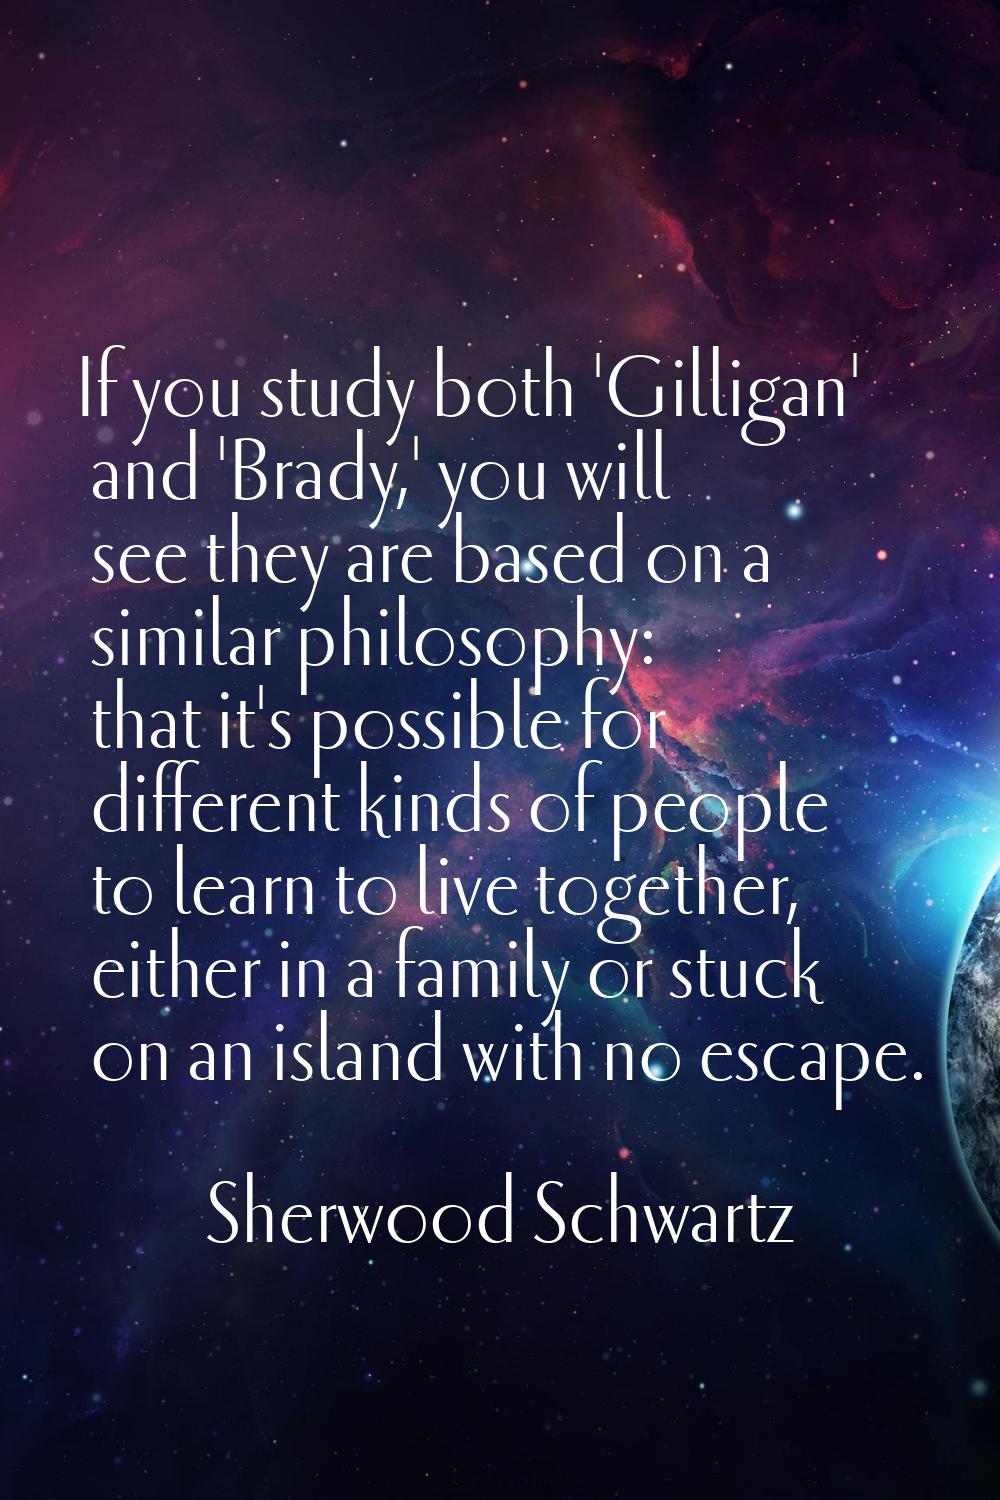 If you study both 'Gilligan' and 'Brady,' you will see they are based on a similar philosophy: that